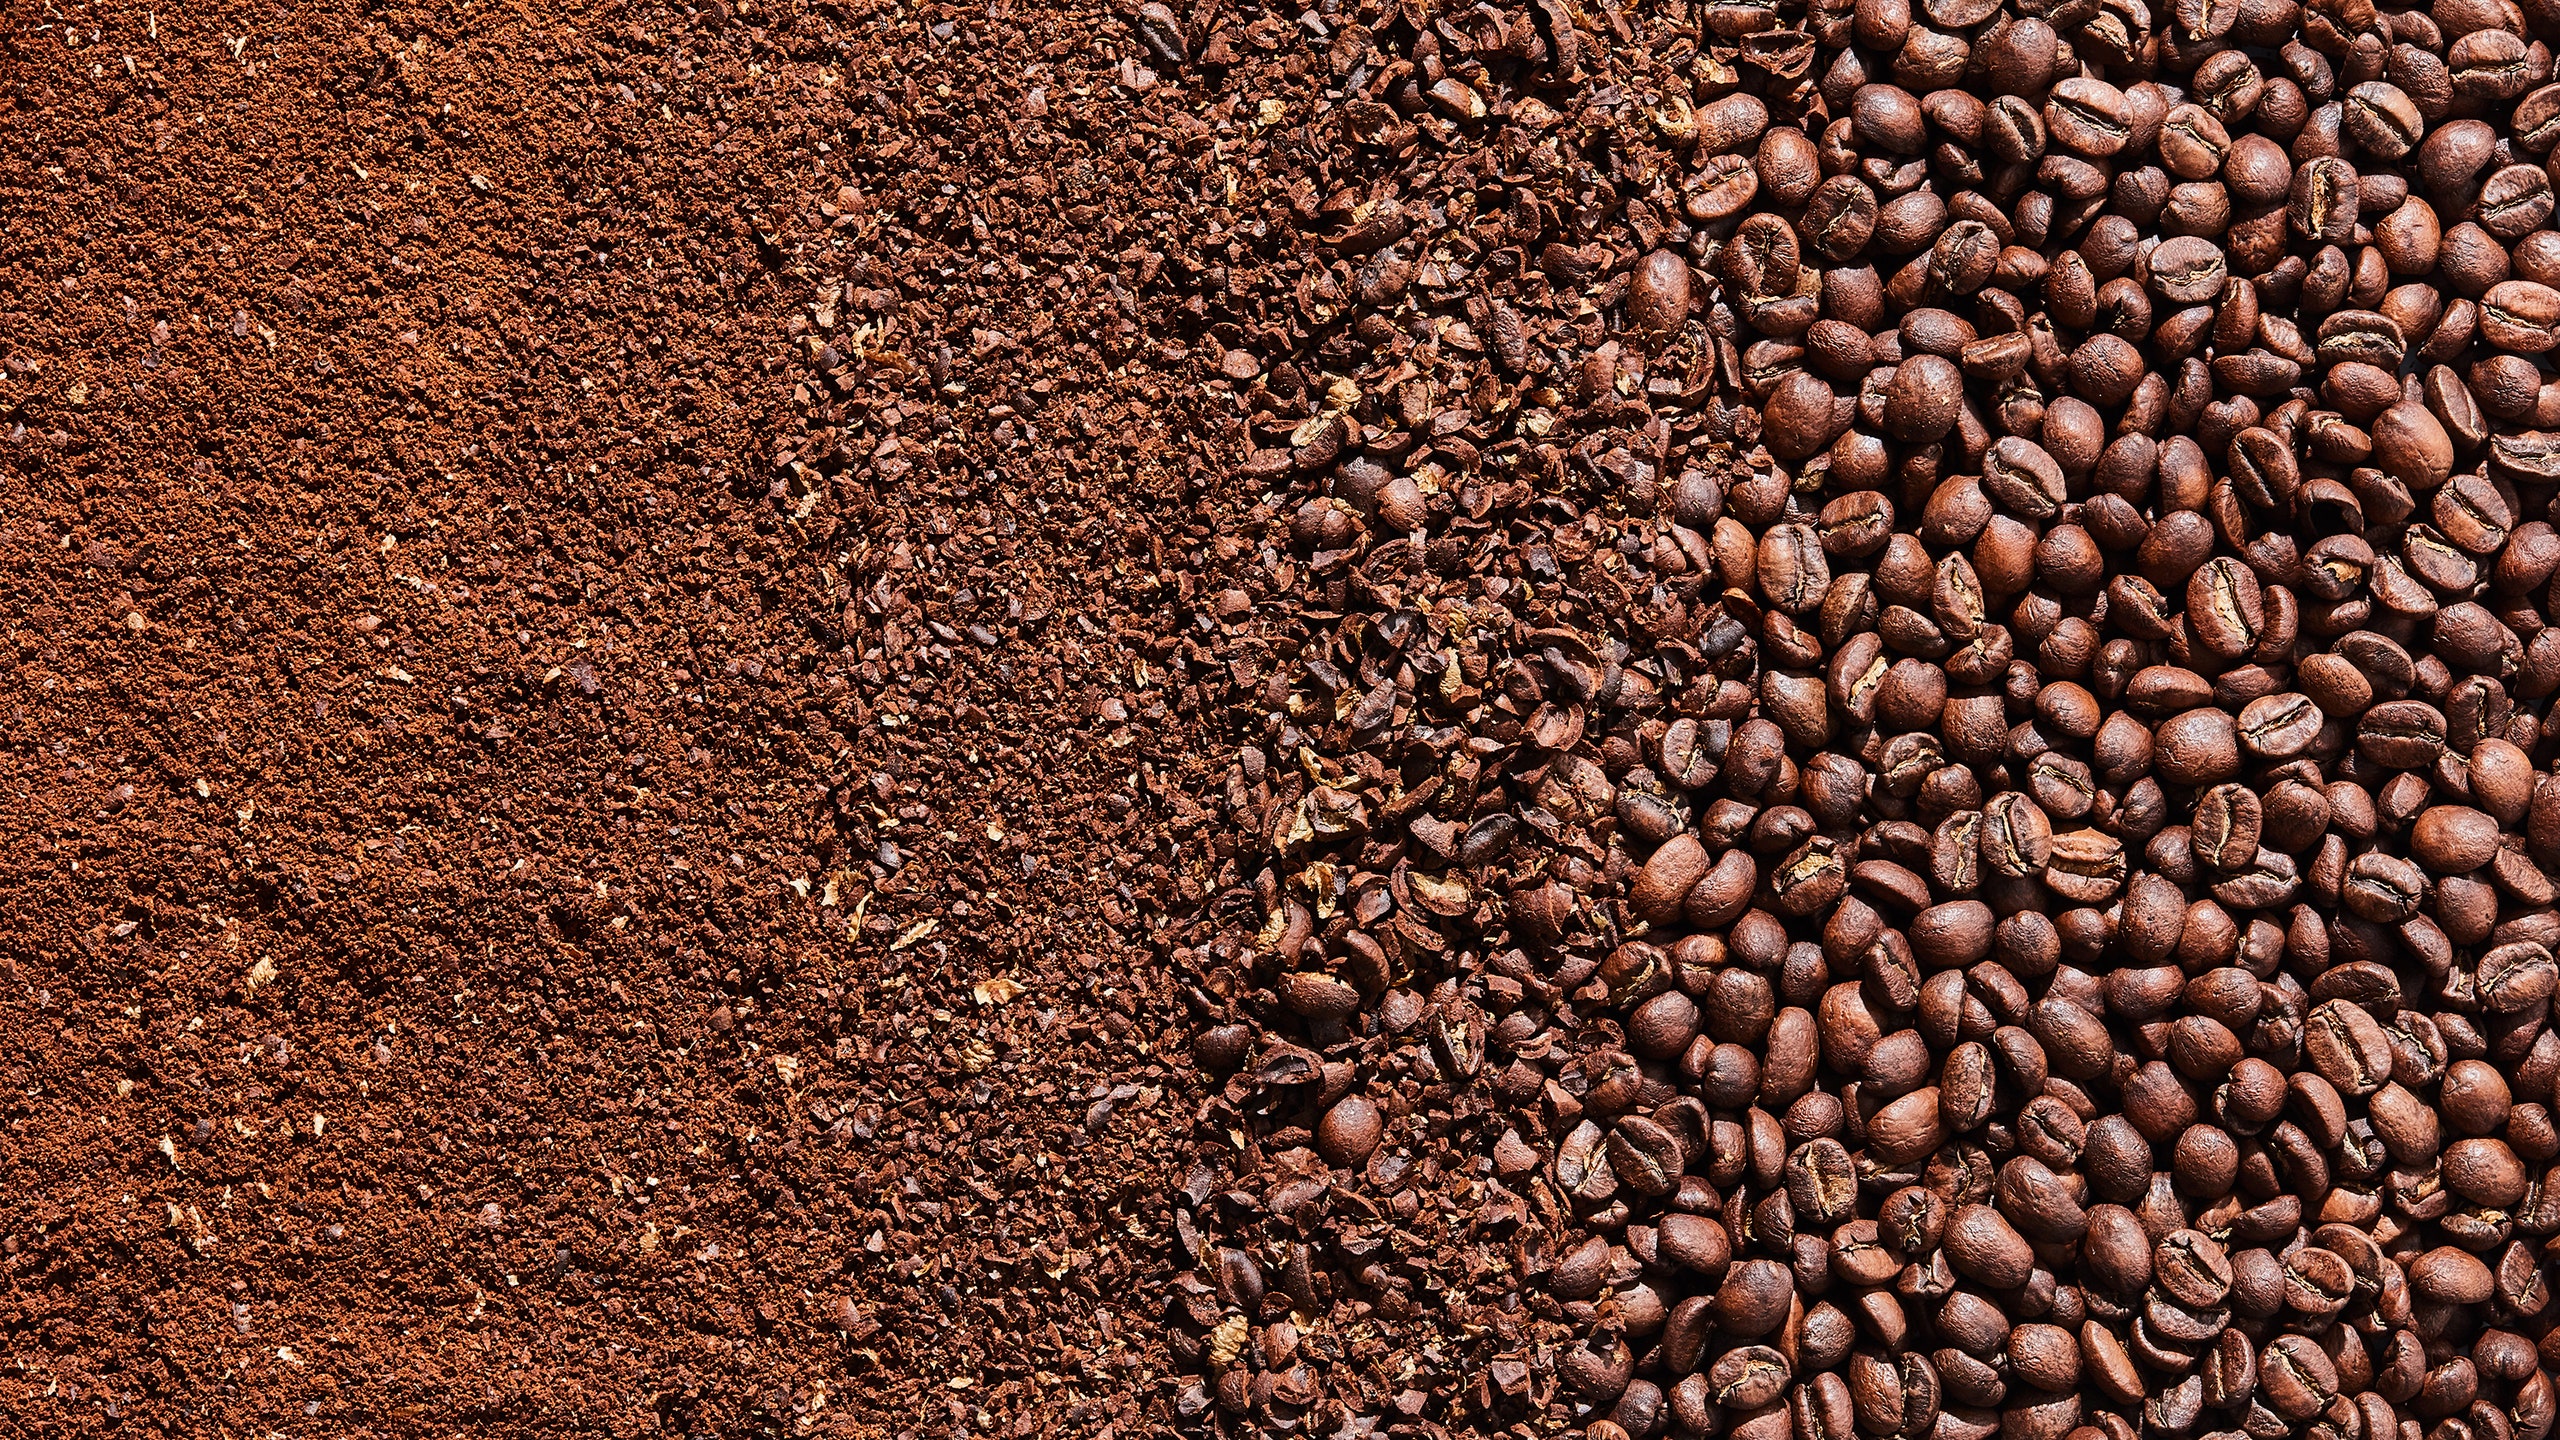 Detail Images Of Coffee Beans Nomer 21